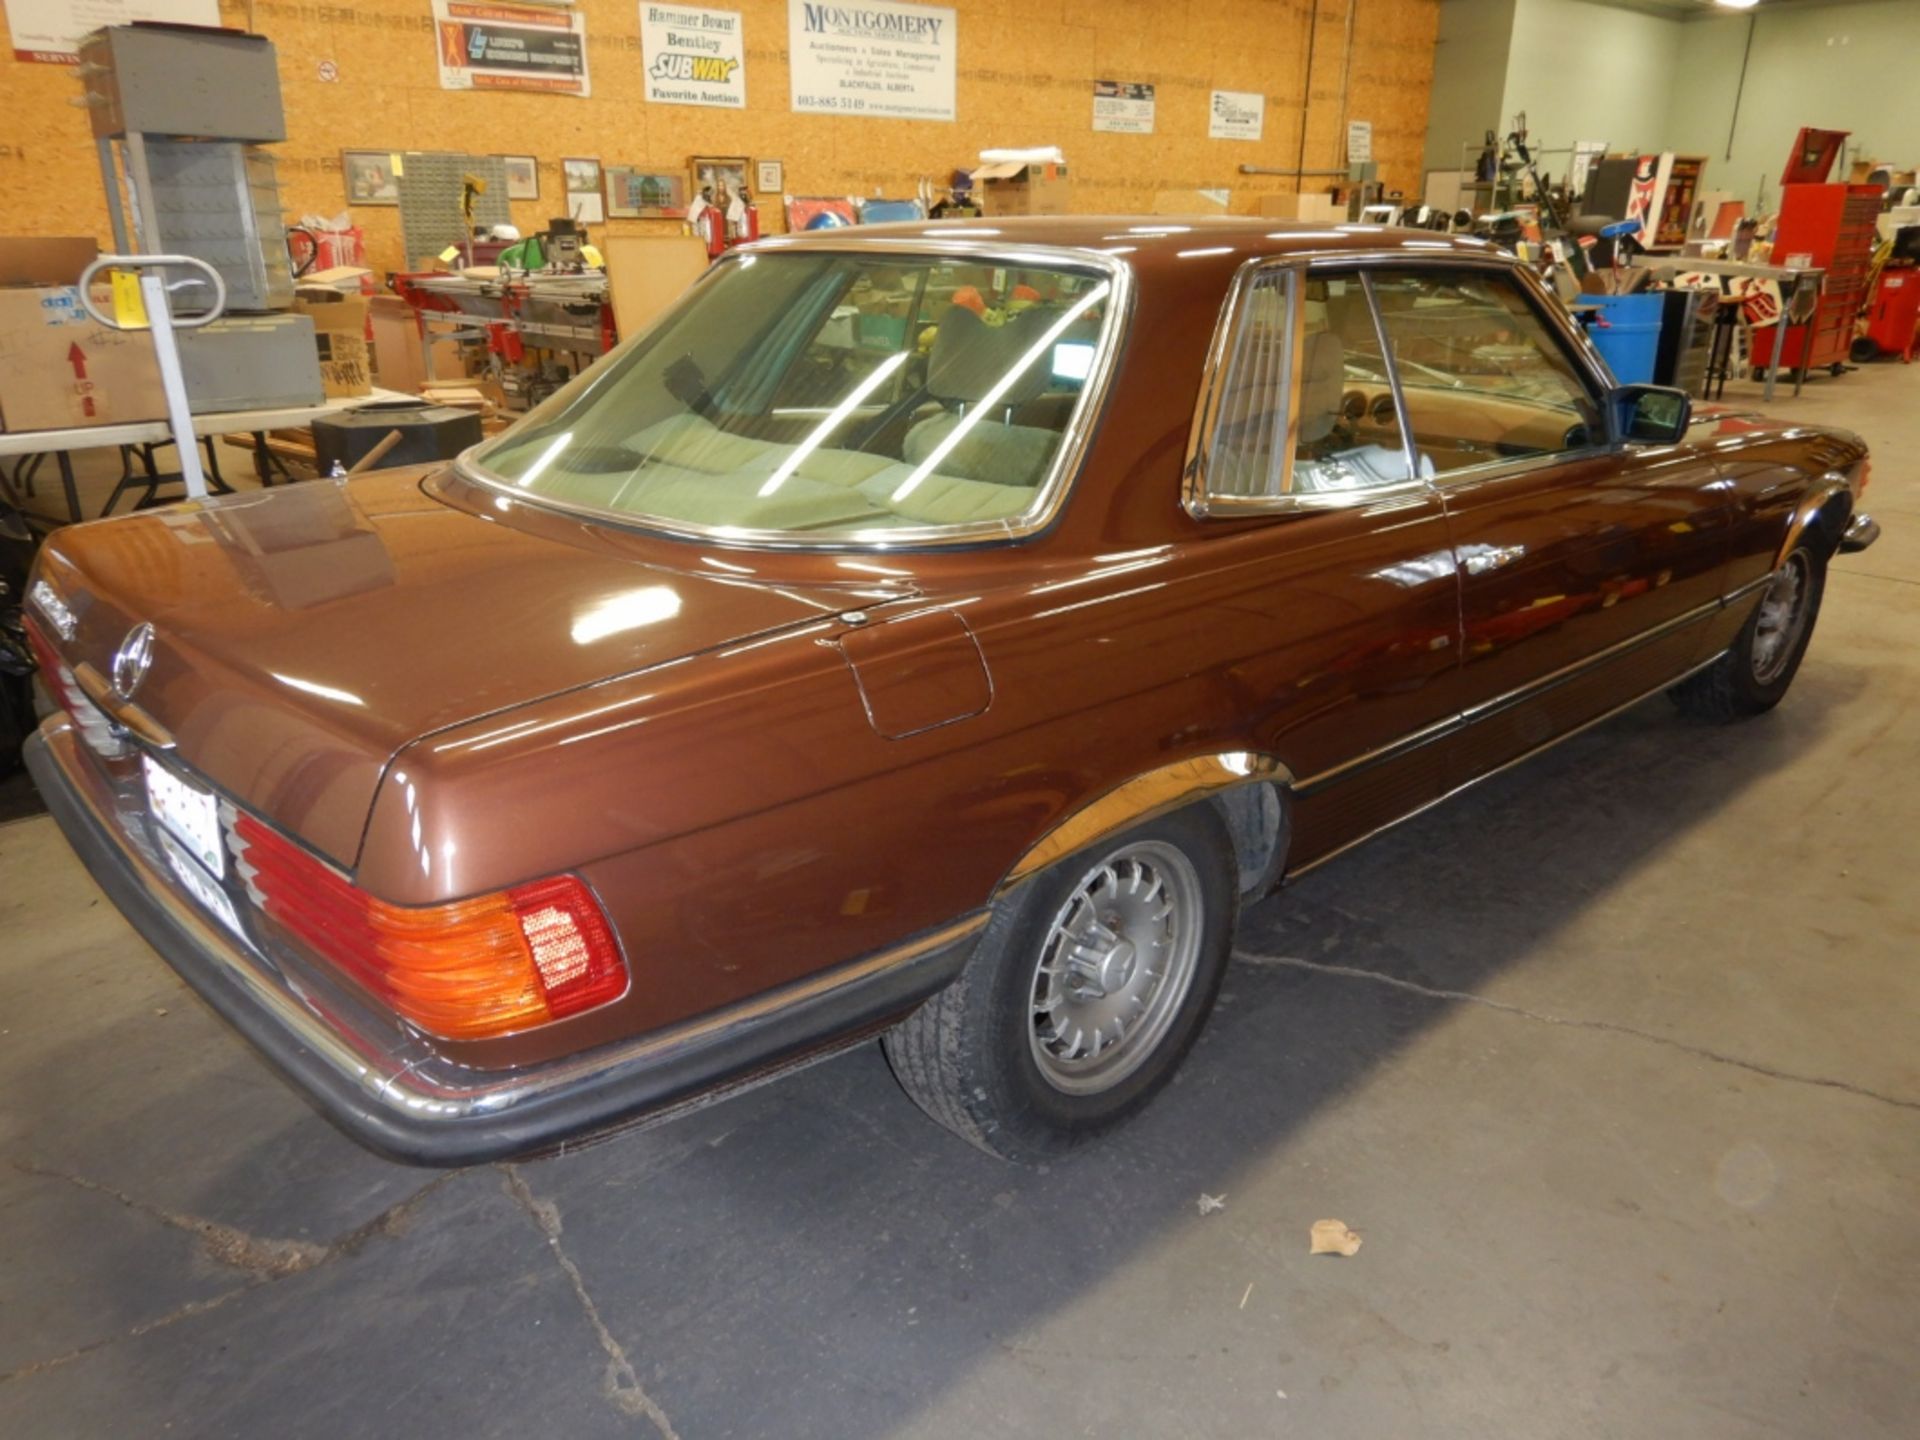 1978 MERCEDES-BENZ 450 SL C COUPE CAR, 2 DR, 2WD, AT, GAS, 227,849KMS, ONE OWNER - Image 16 of 19